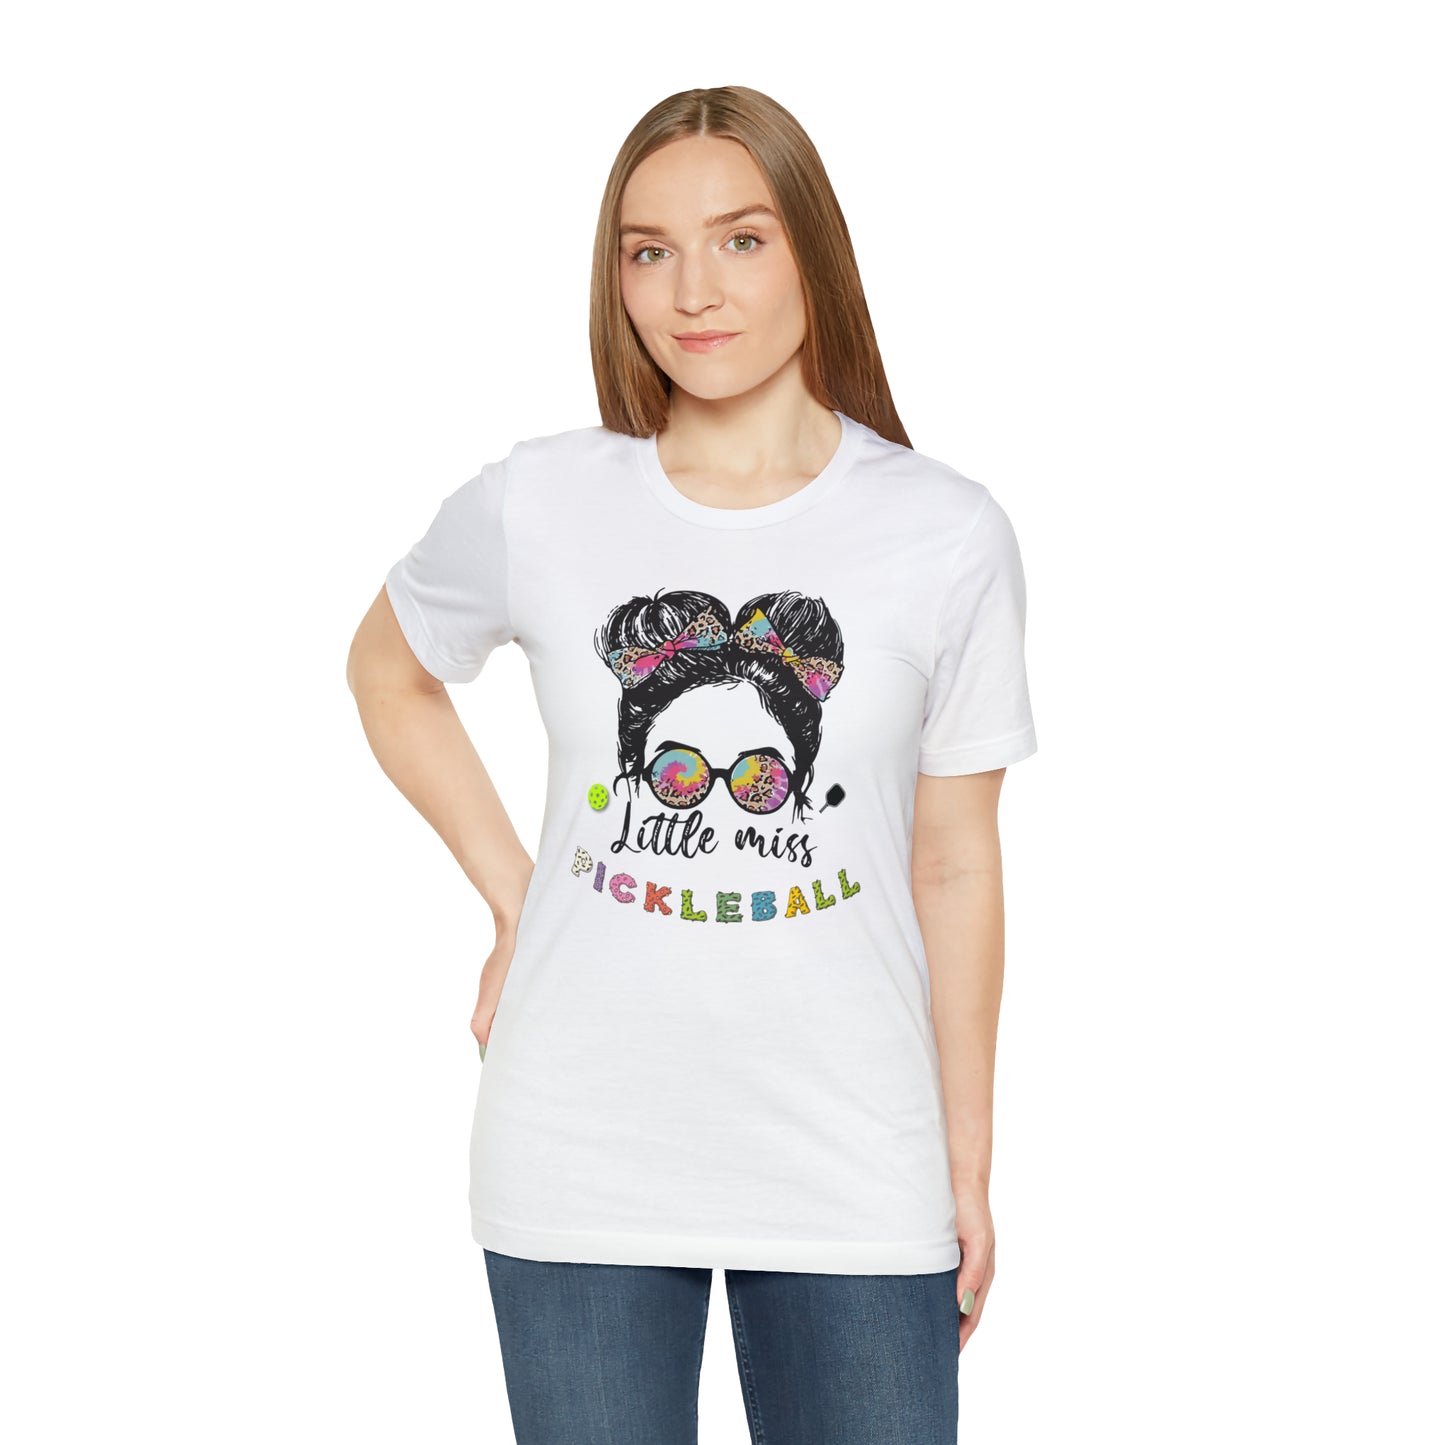 Little Miss Pickleball - Unisex Jersey Tee for the Pickleball Enthusiast